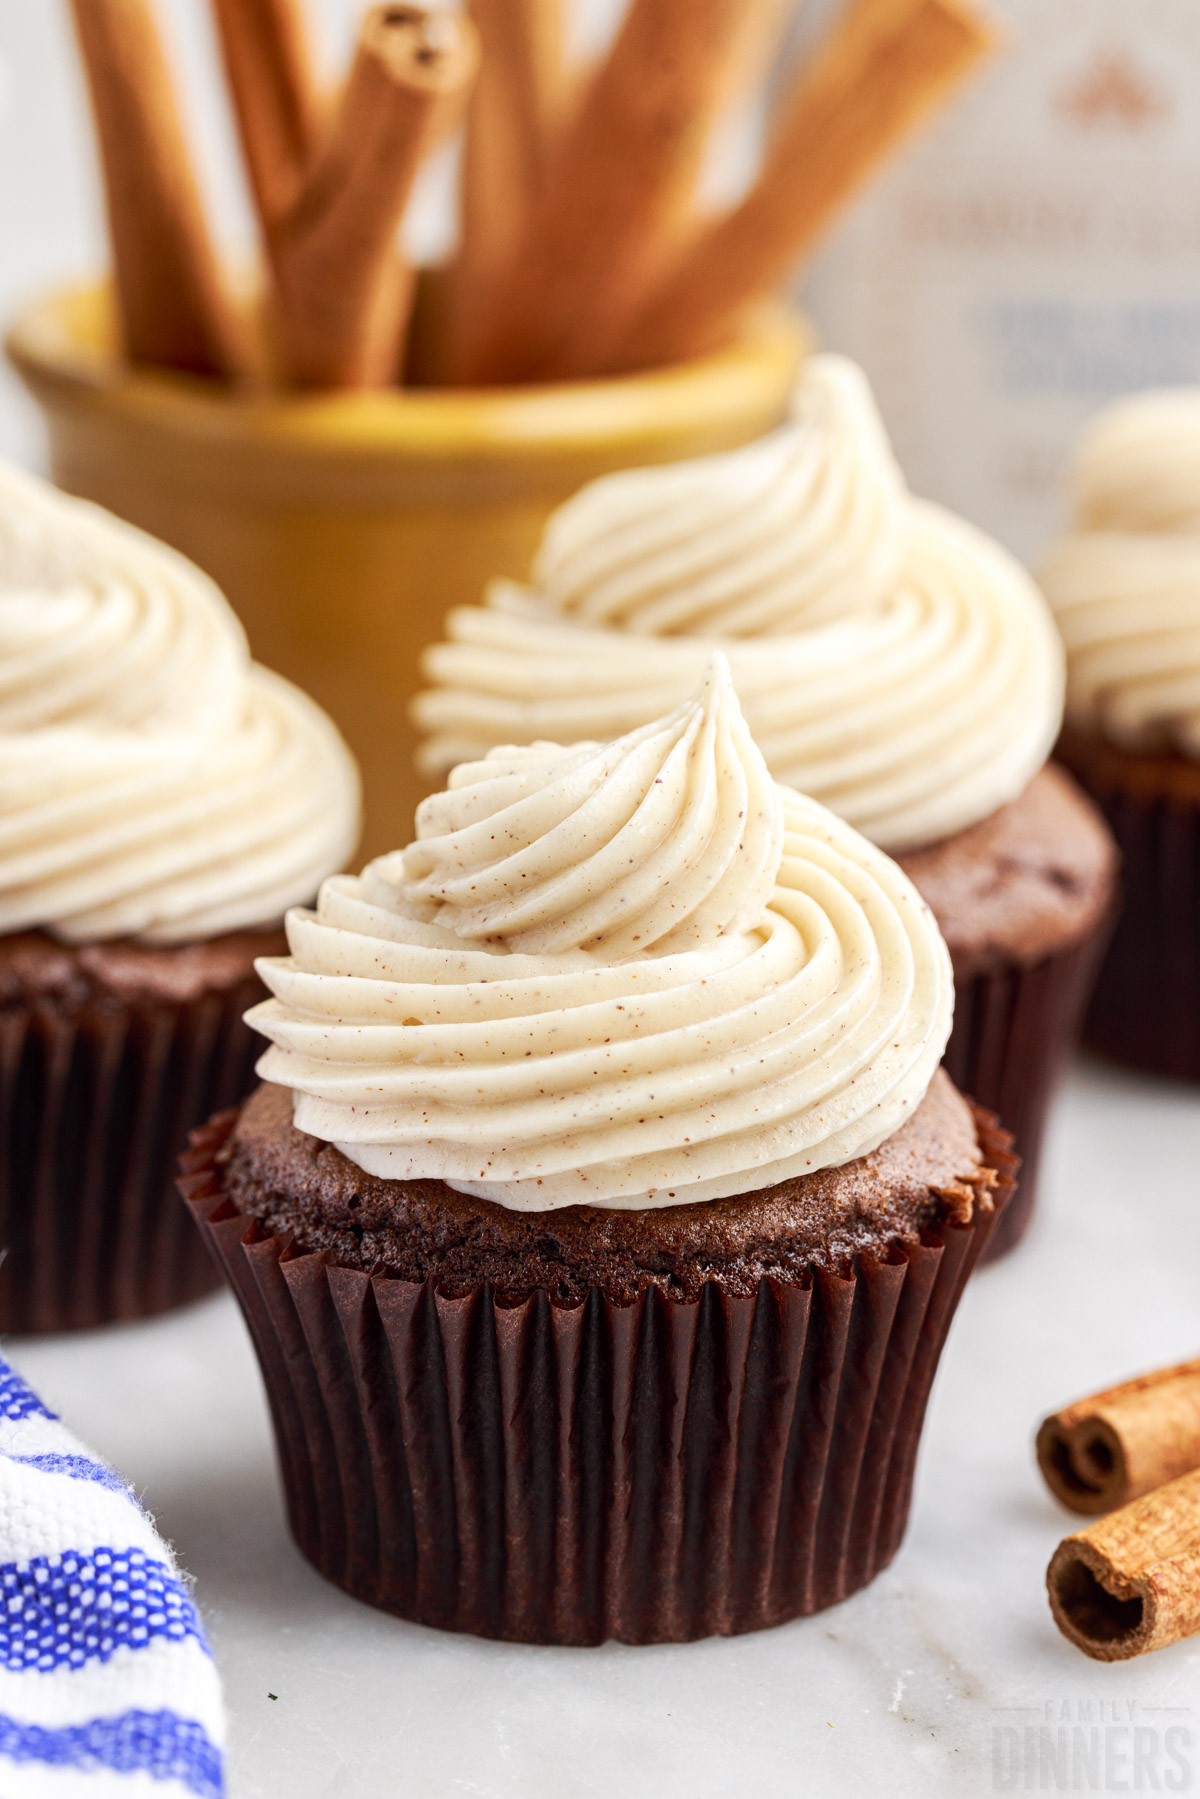 cinnamon cream cheese frosting on chocolate cupcakes